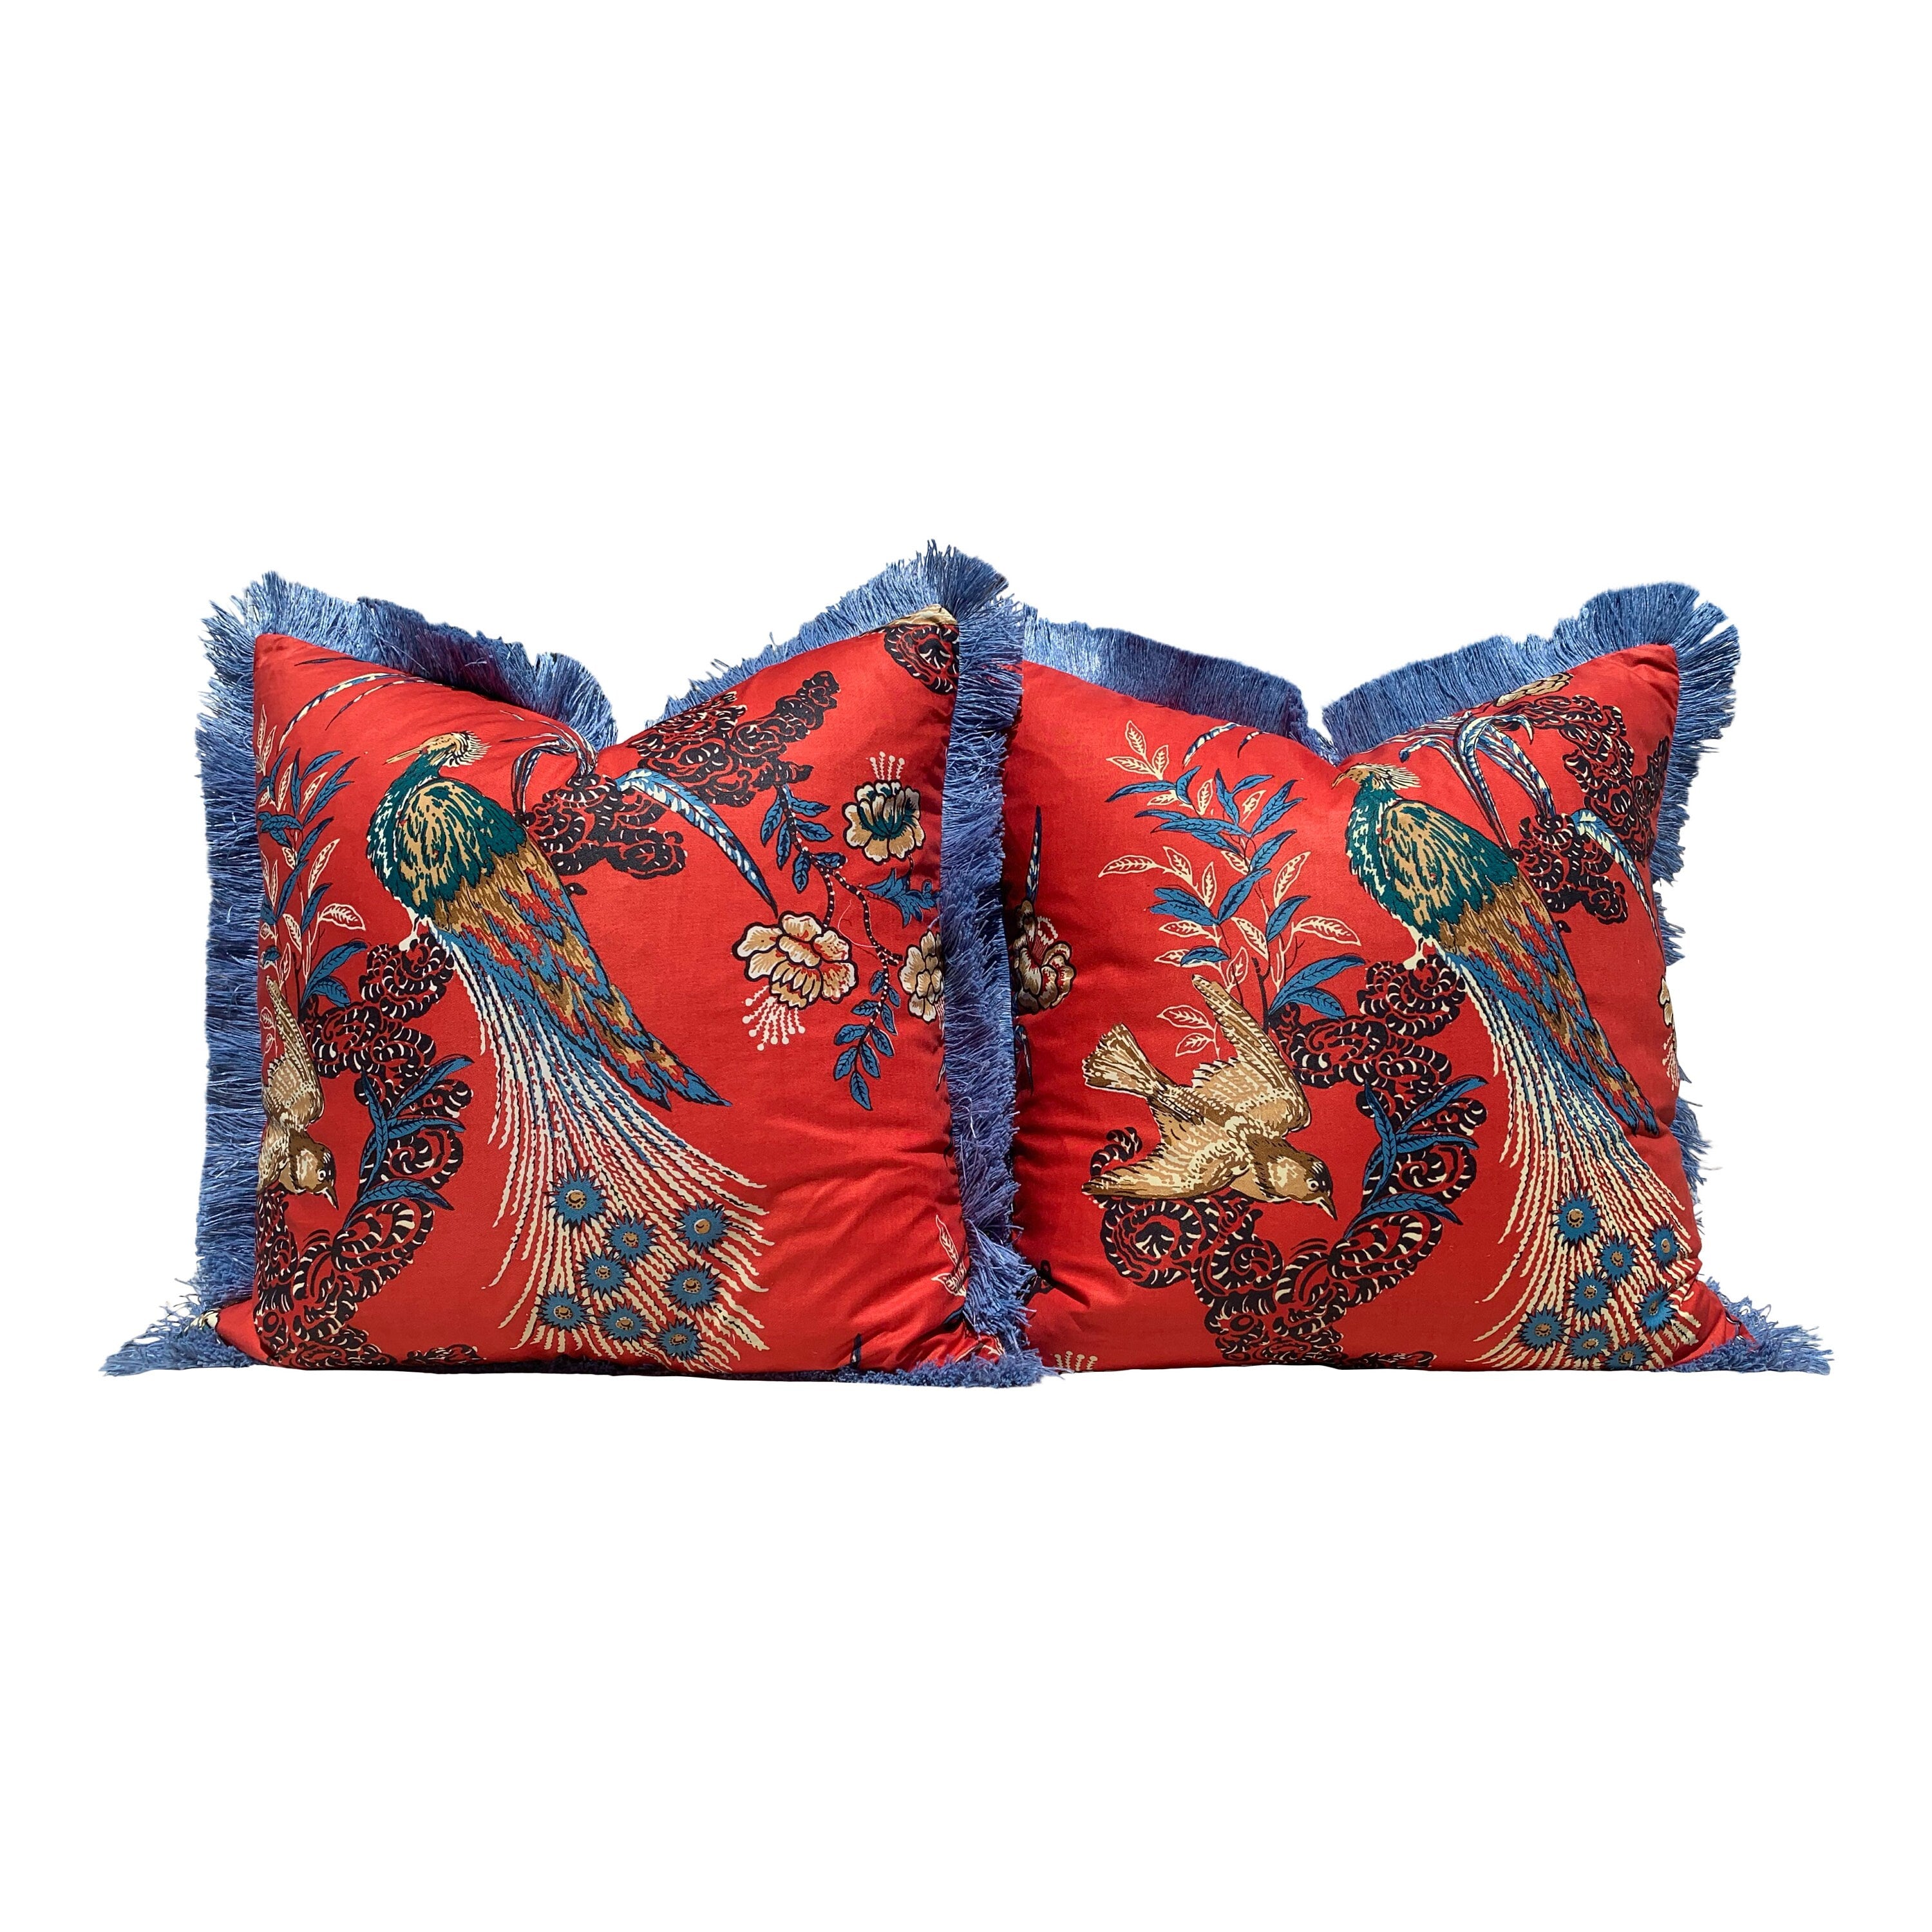 Schumacher Peacock Pillow in red Embelished with French Blue Brush Trim. Decorative Pillow. Bird Throw Pillow.